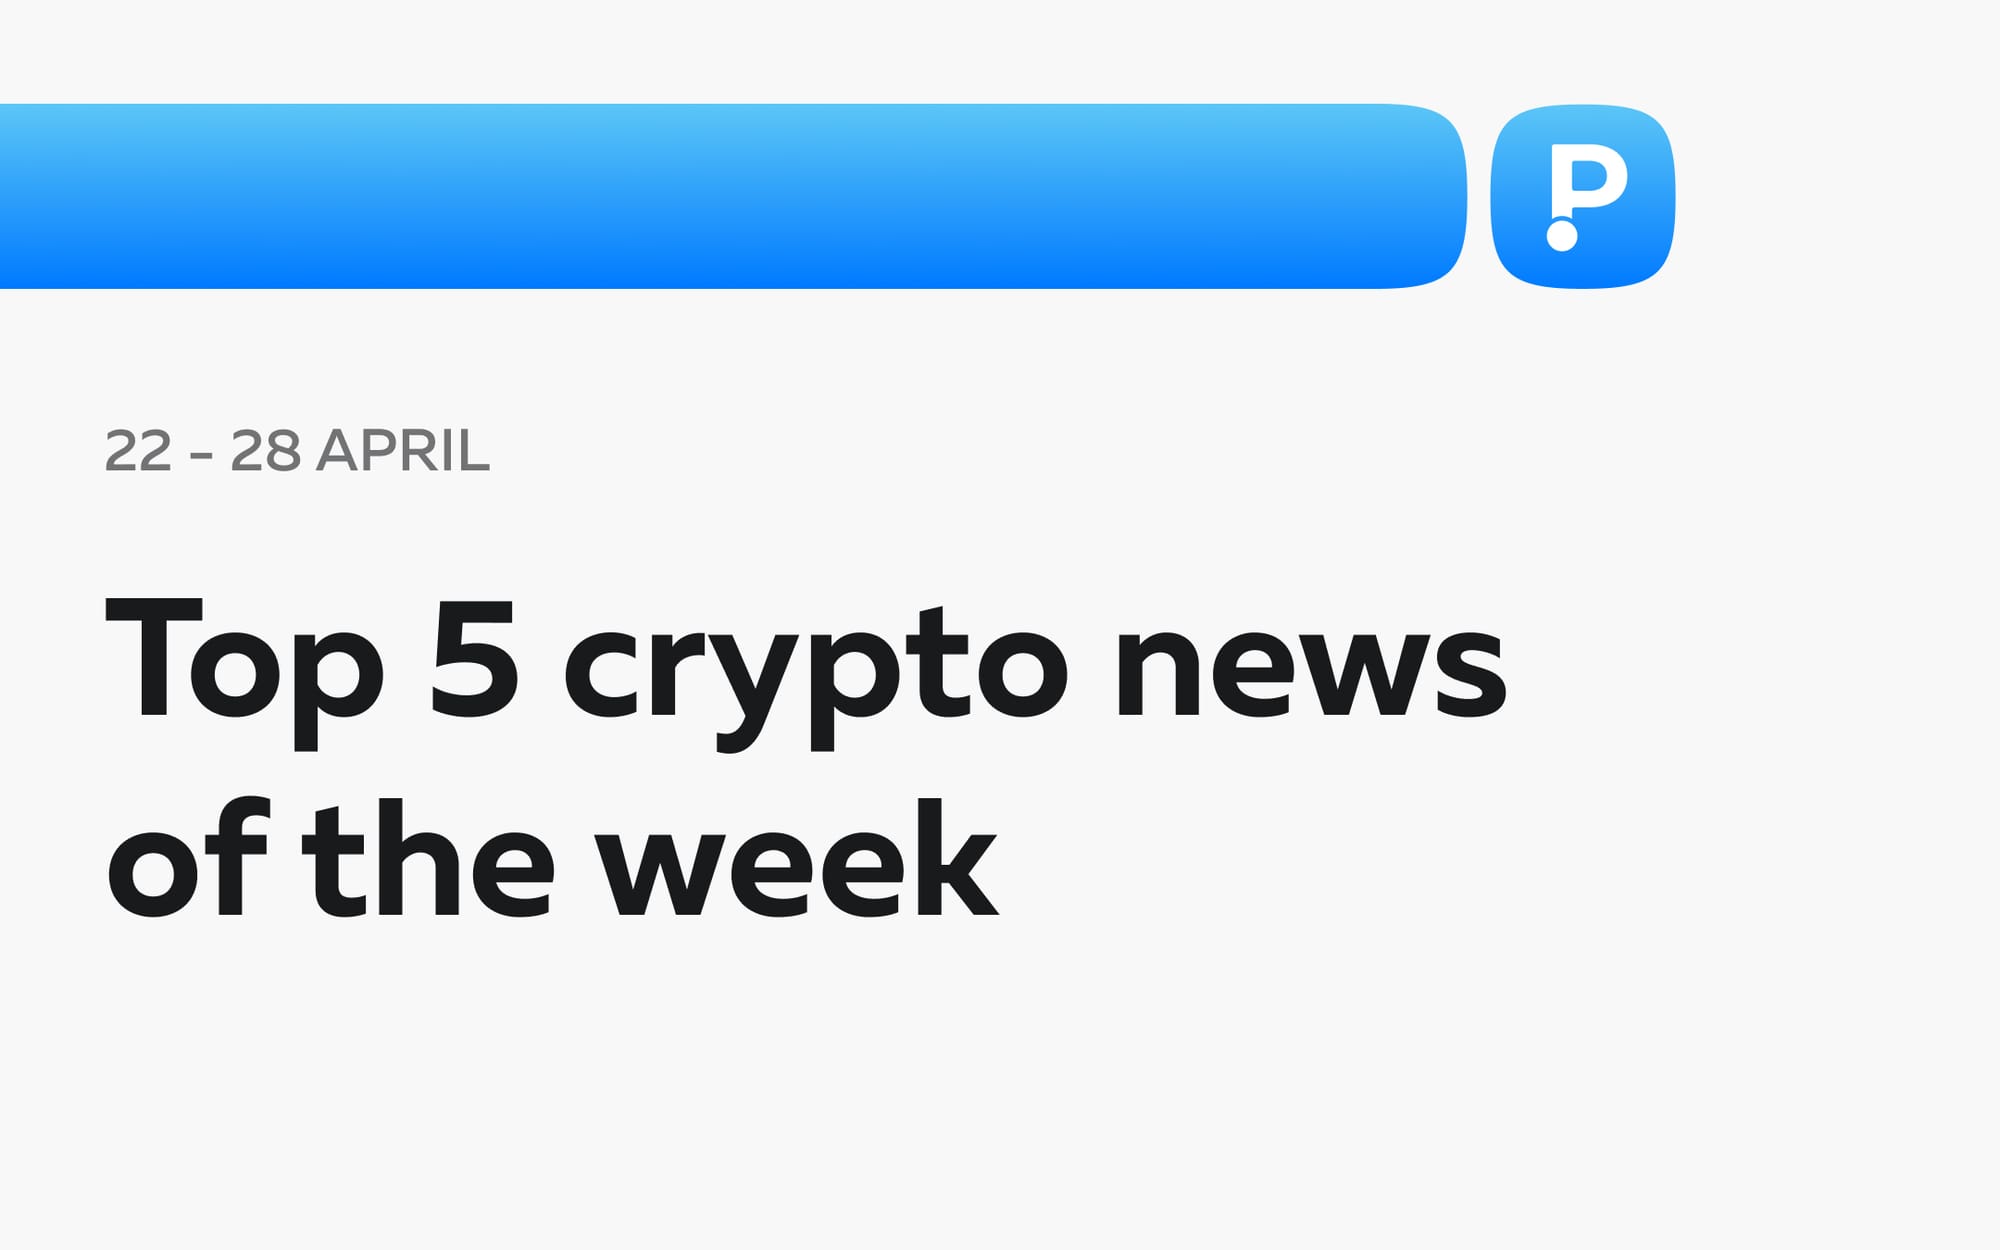 Top-5 Most Interesting Crypto News of the Week! (22 - 26 April)